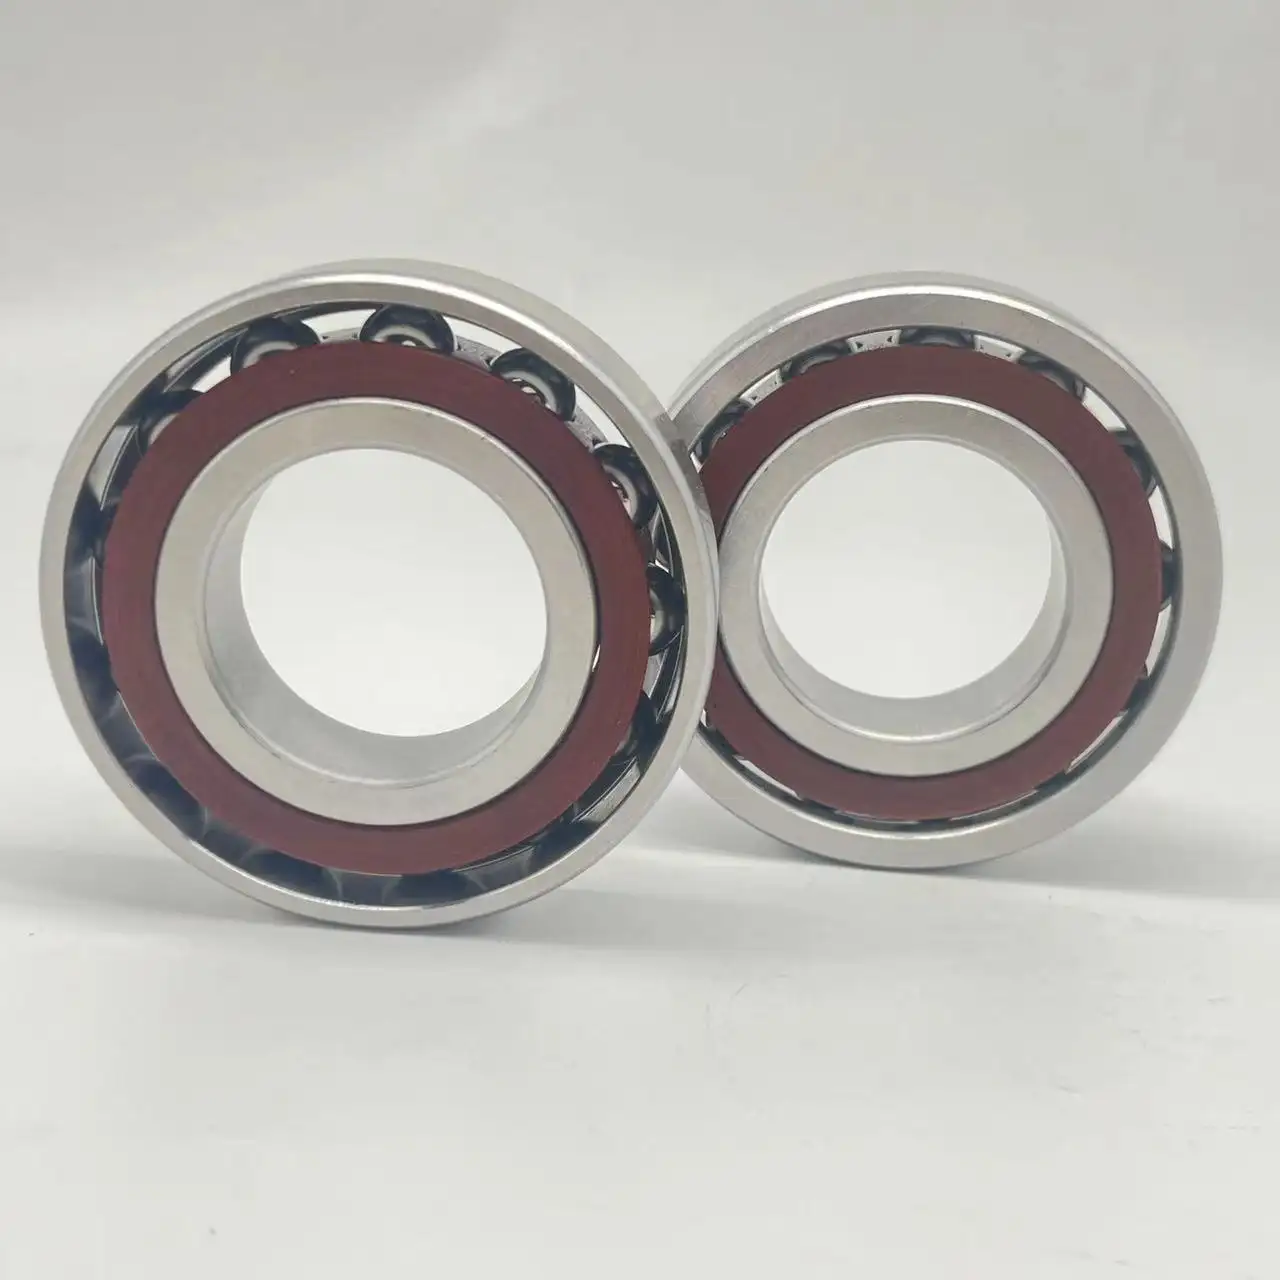 Manufacturer's 304 Stainless Steel Angular Contact Ball Bearing SS7020AC